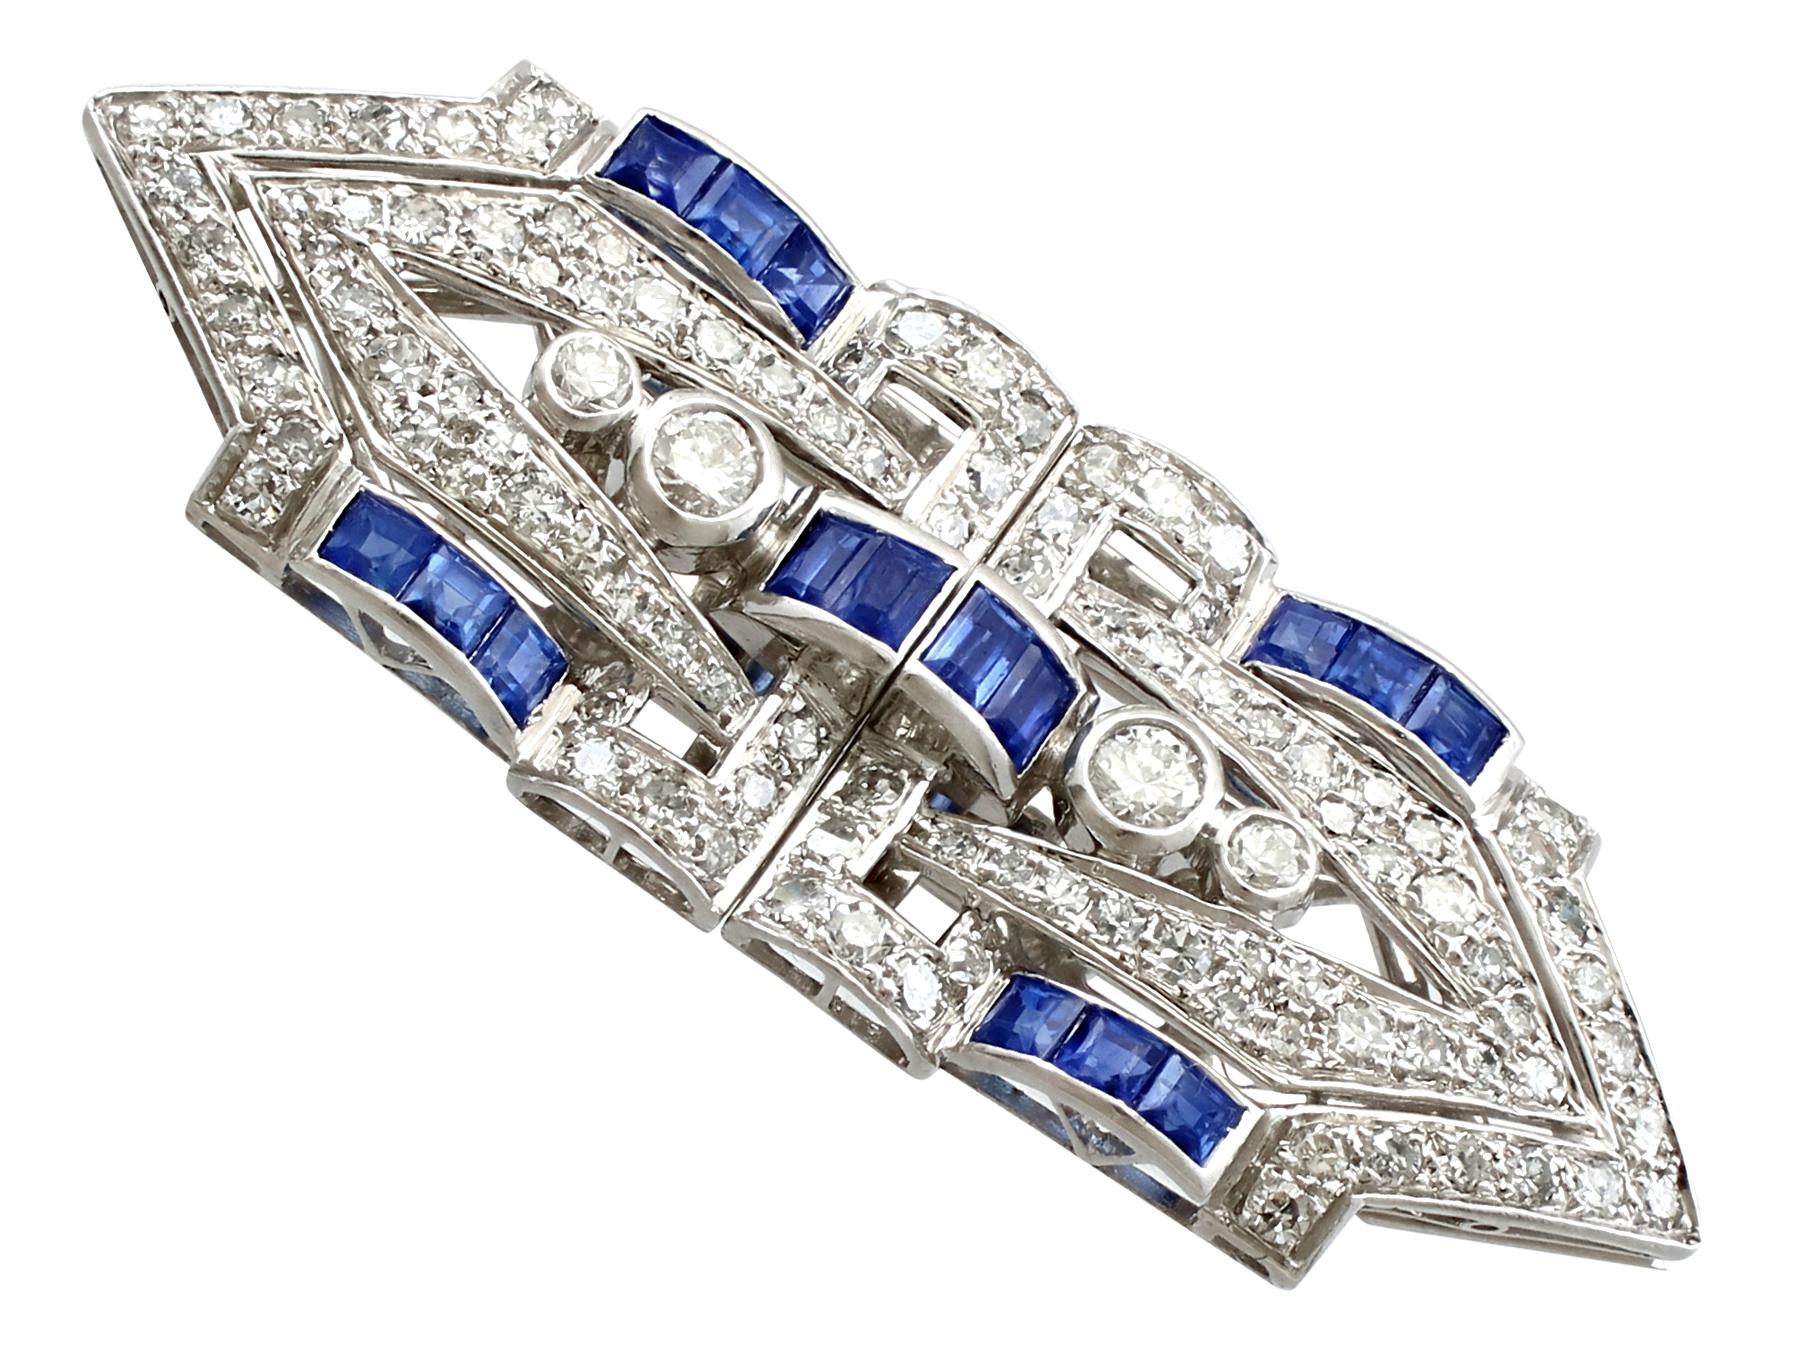 An impressive antique Art Deco 1.65 carat sapphire and 3.16 carat diamond, 18 karat white gold and platinum double clip brooch; part of our diverse antique jewellery and estate jewelry collections.

This fine and impressive antique sapphire and